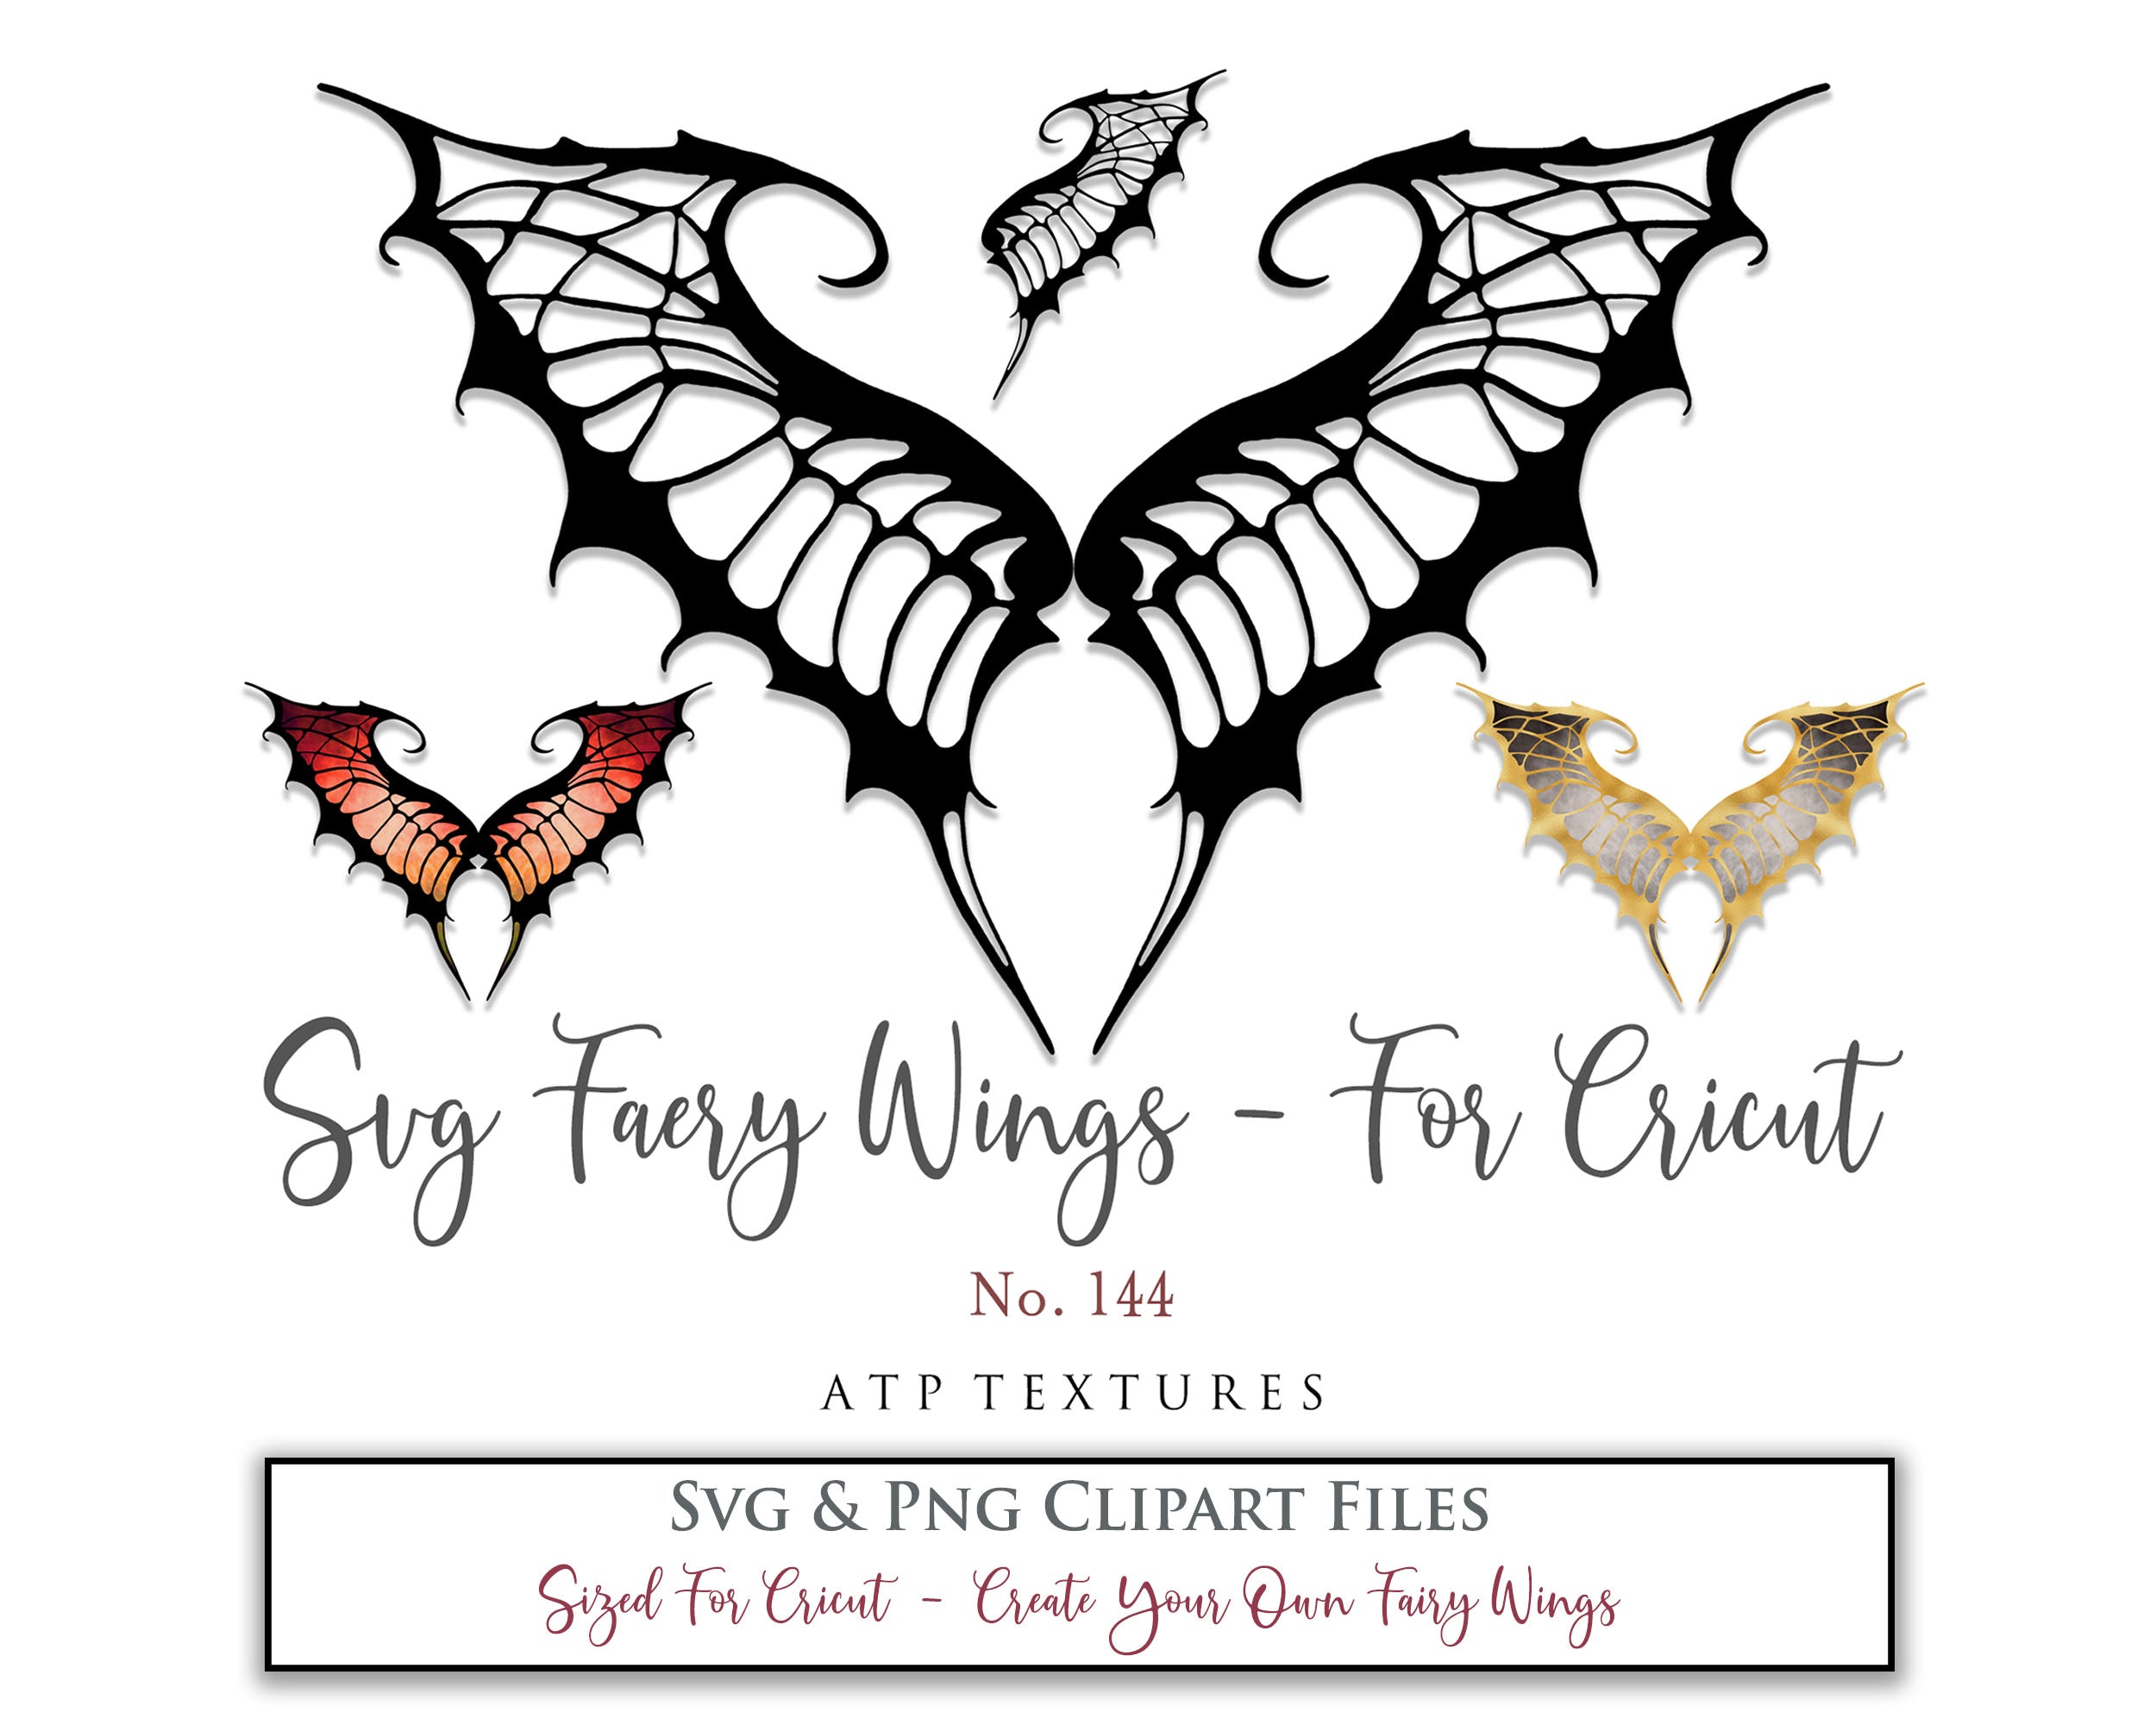 SVG & PNG Fairy/Angel Wing files for Cricut, Silhouette Cameo and other Cutting Machines. Create wearable fairy wings, all sizes. Perfect for Halloween Costumes, Fantasy, Cosplay, Photography. Prints, Wedding, Engagement, Baby Shower invitations, Sublimation Printing, Clip Art and more. Cut and assemble. ATP Textures. 